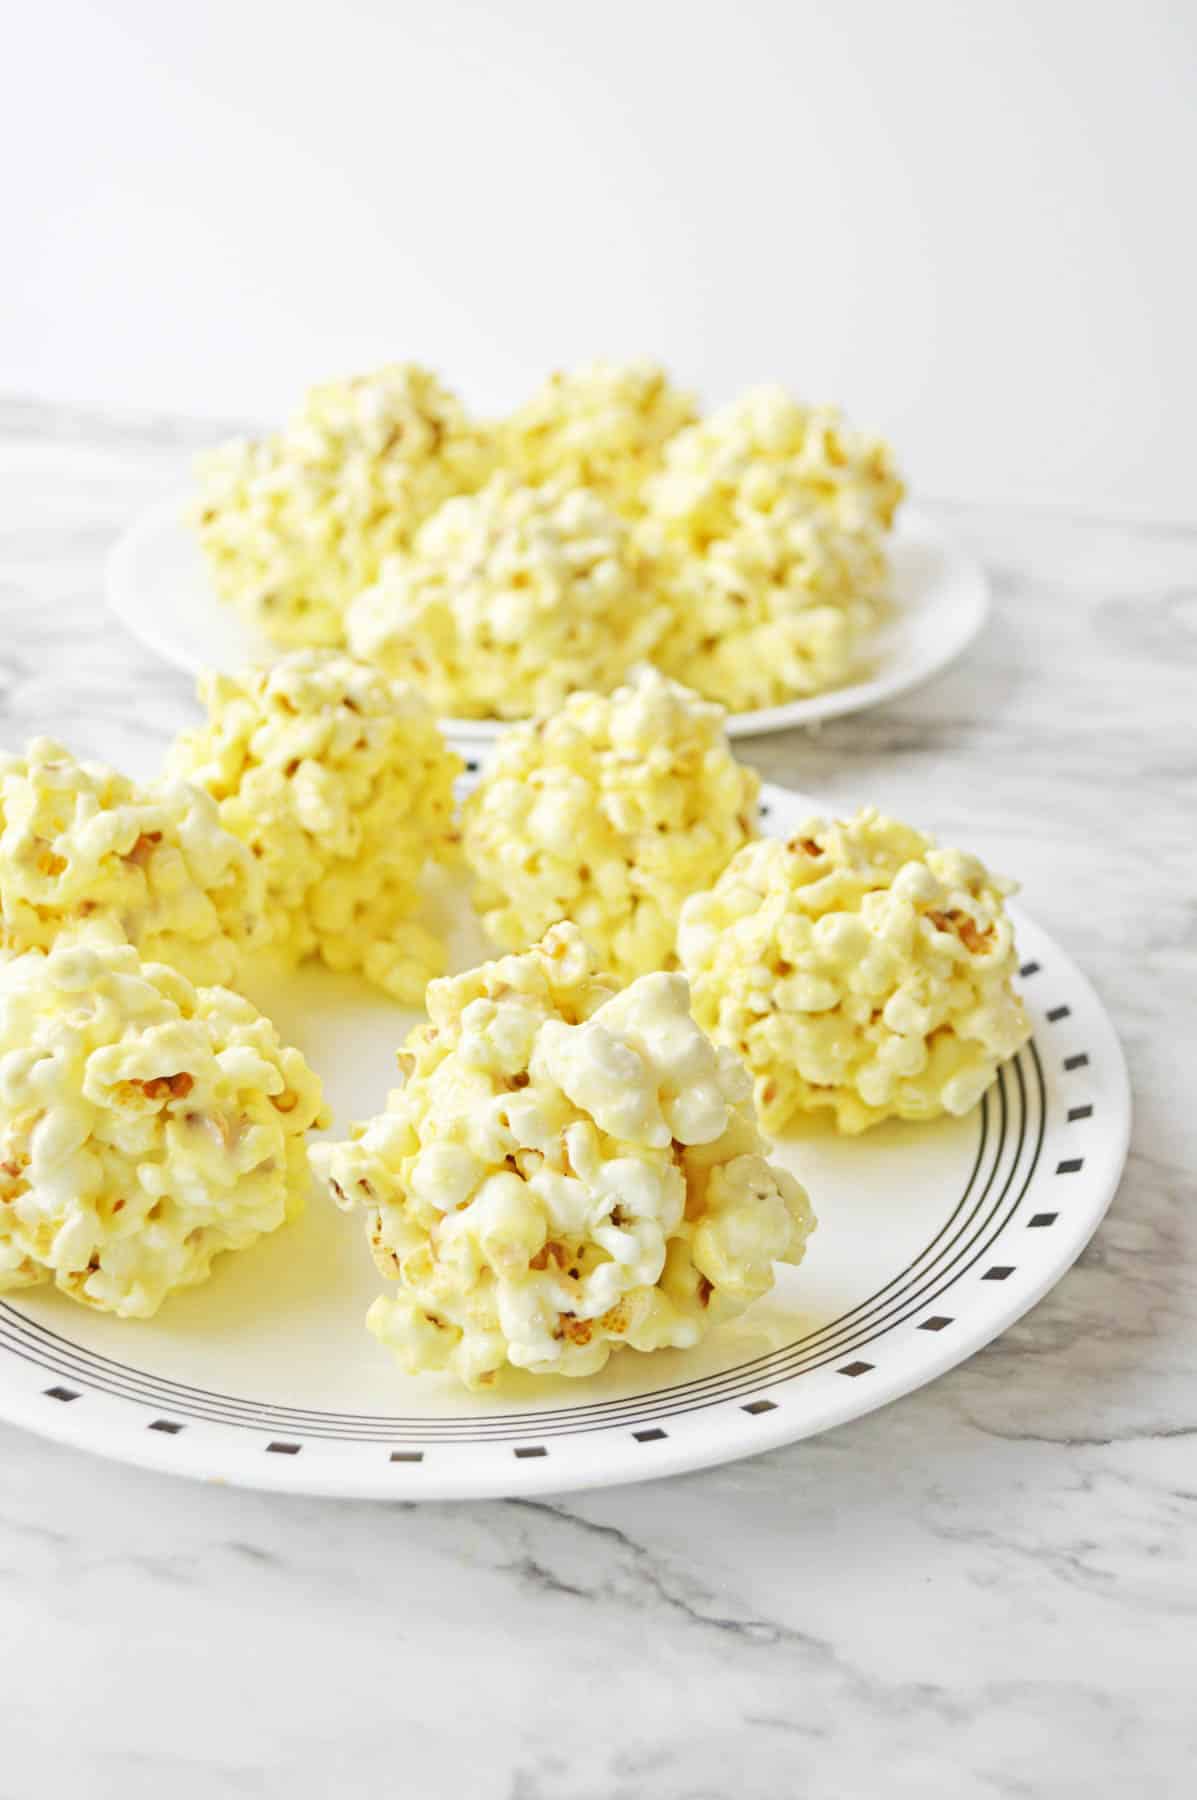 Popcorn balls on a plate on a marble table.